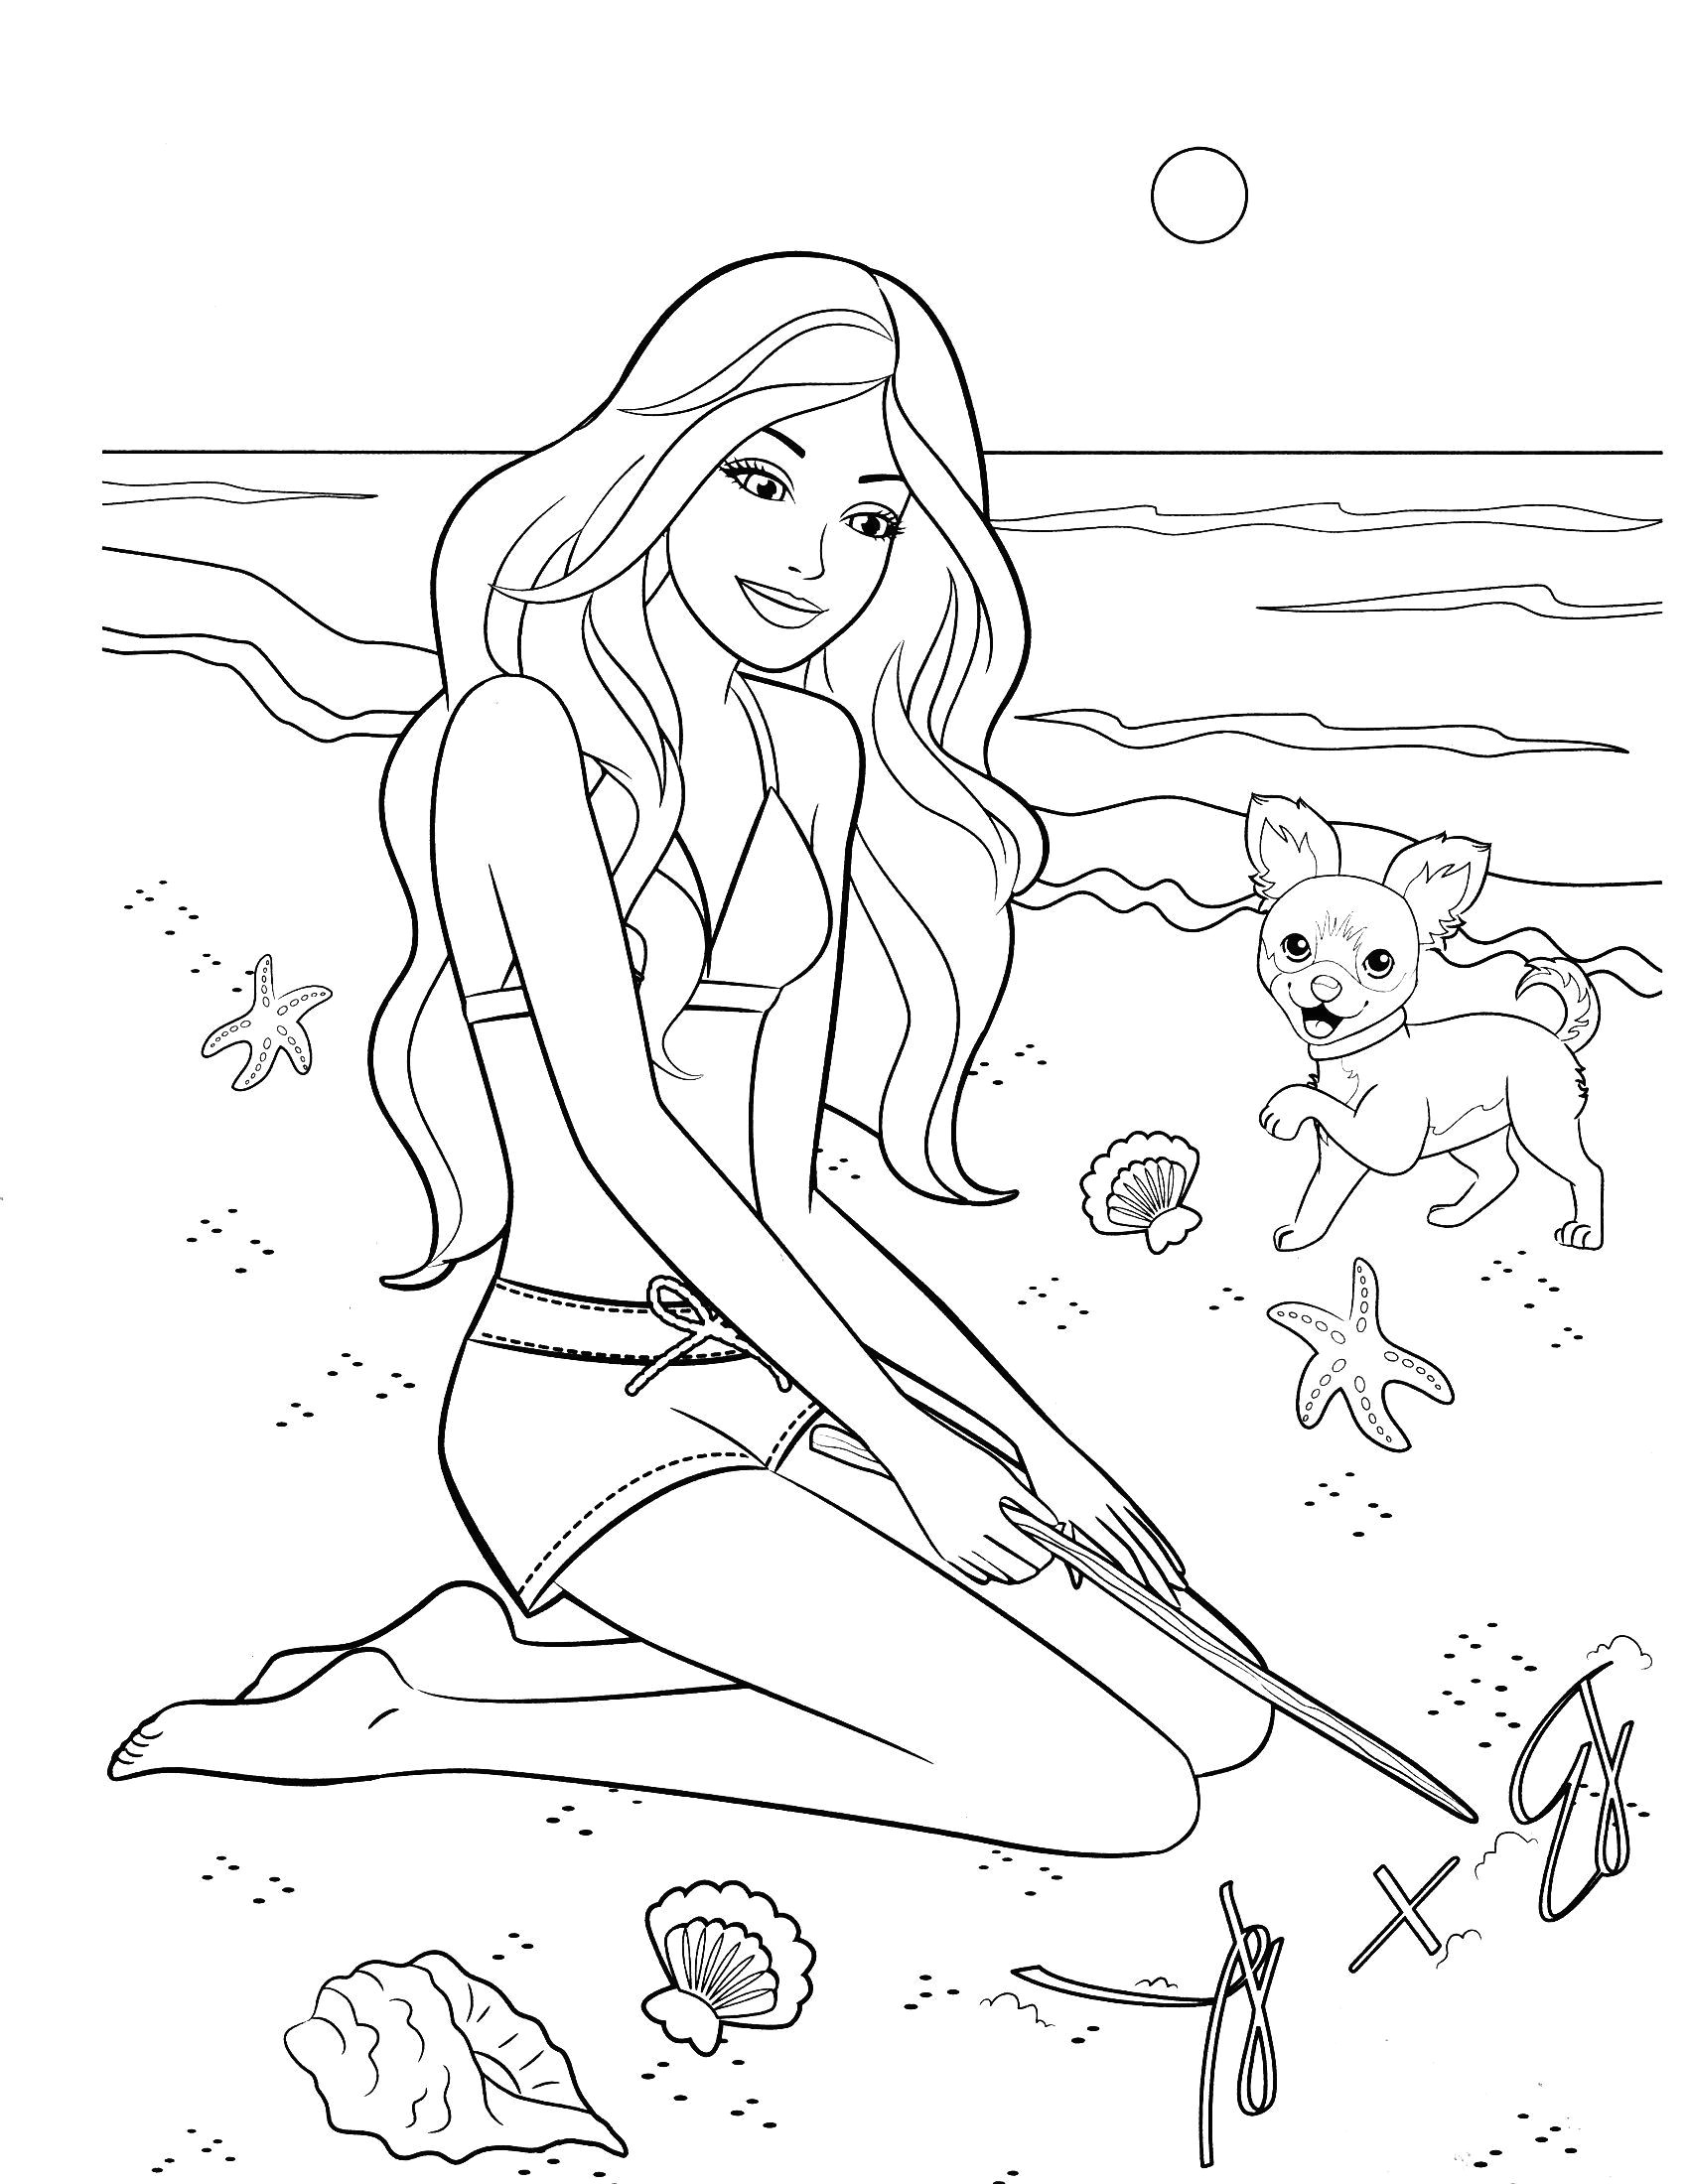 8d019bd5537426d1954cb89b6e4036e3 barbie coloring page valid barbie girl coloring pages games new 1700 2200 jpeg